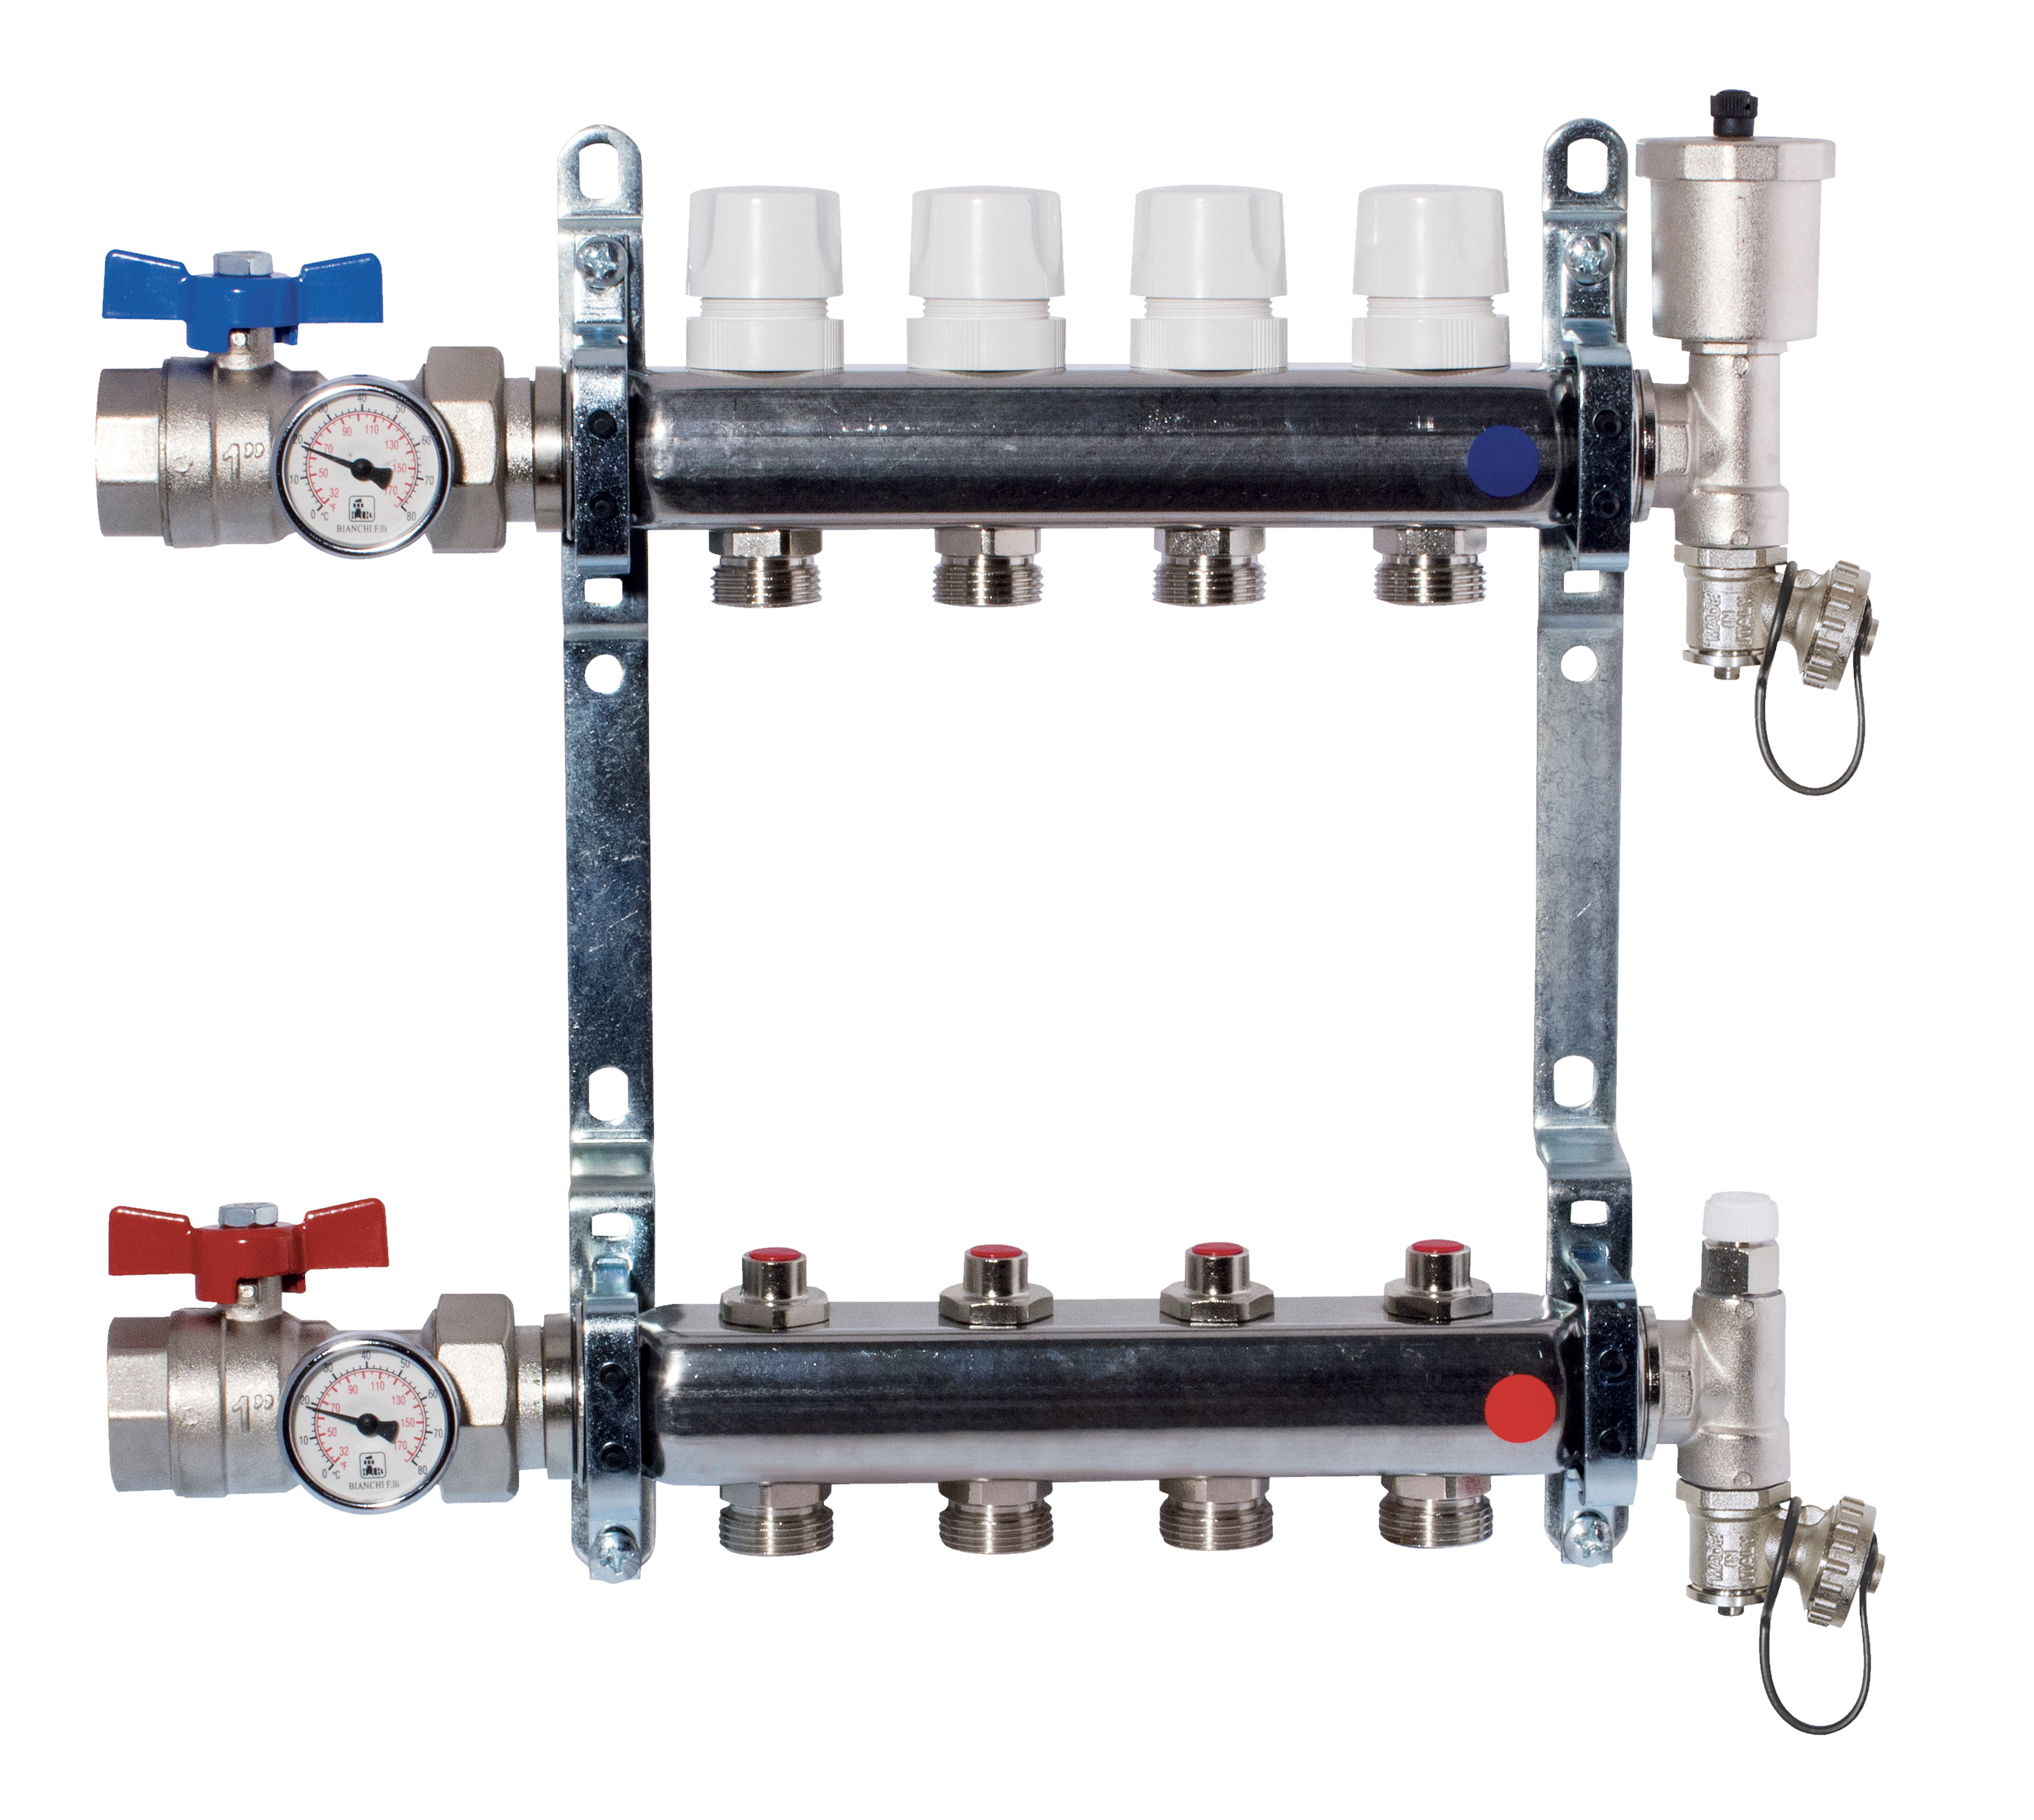 FF manifolds therm. valves and lockshield, valves, discharge